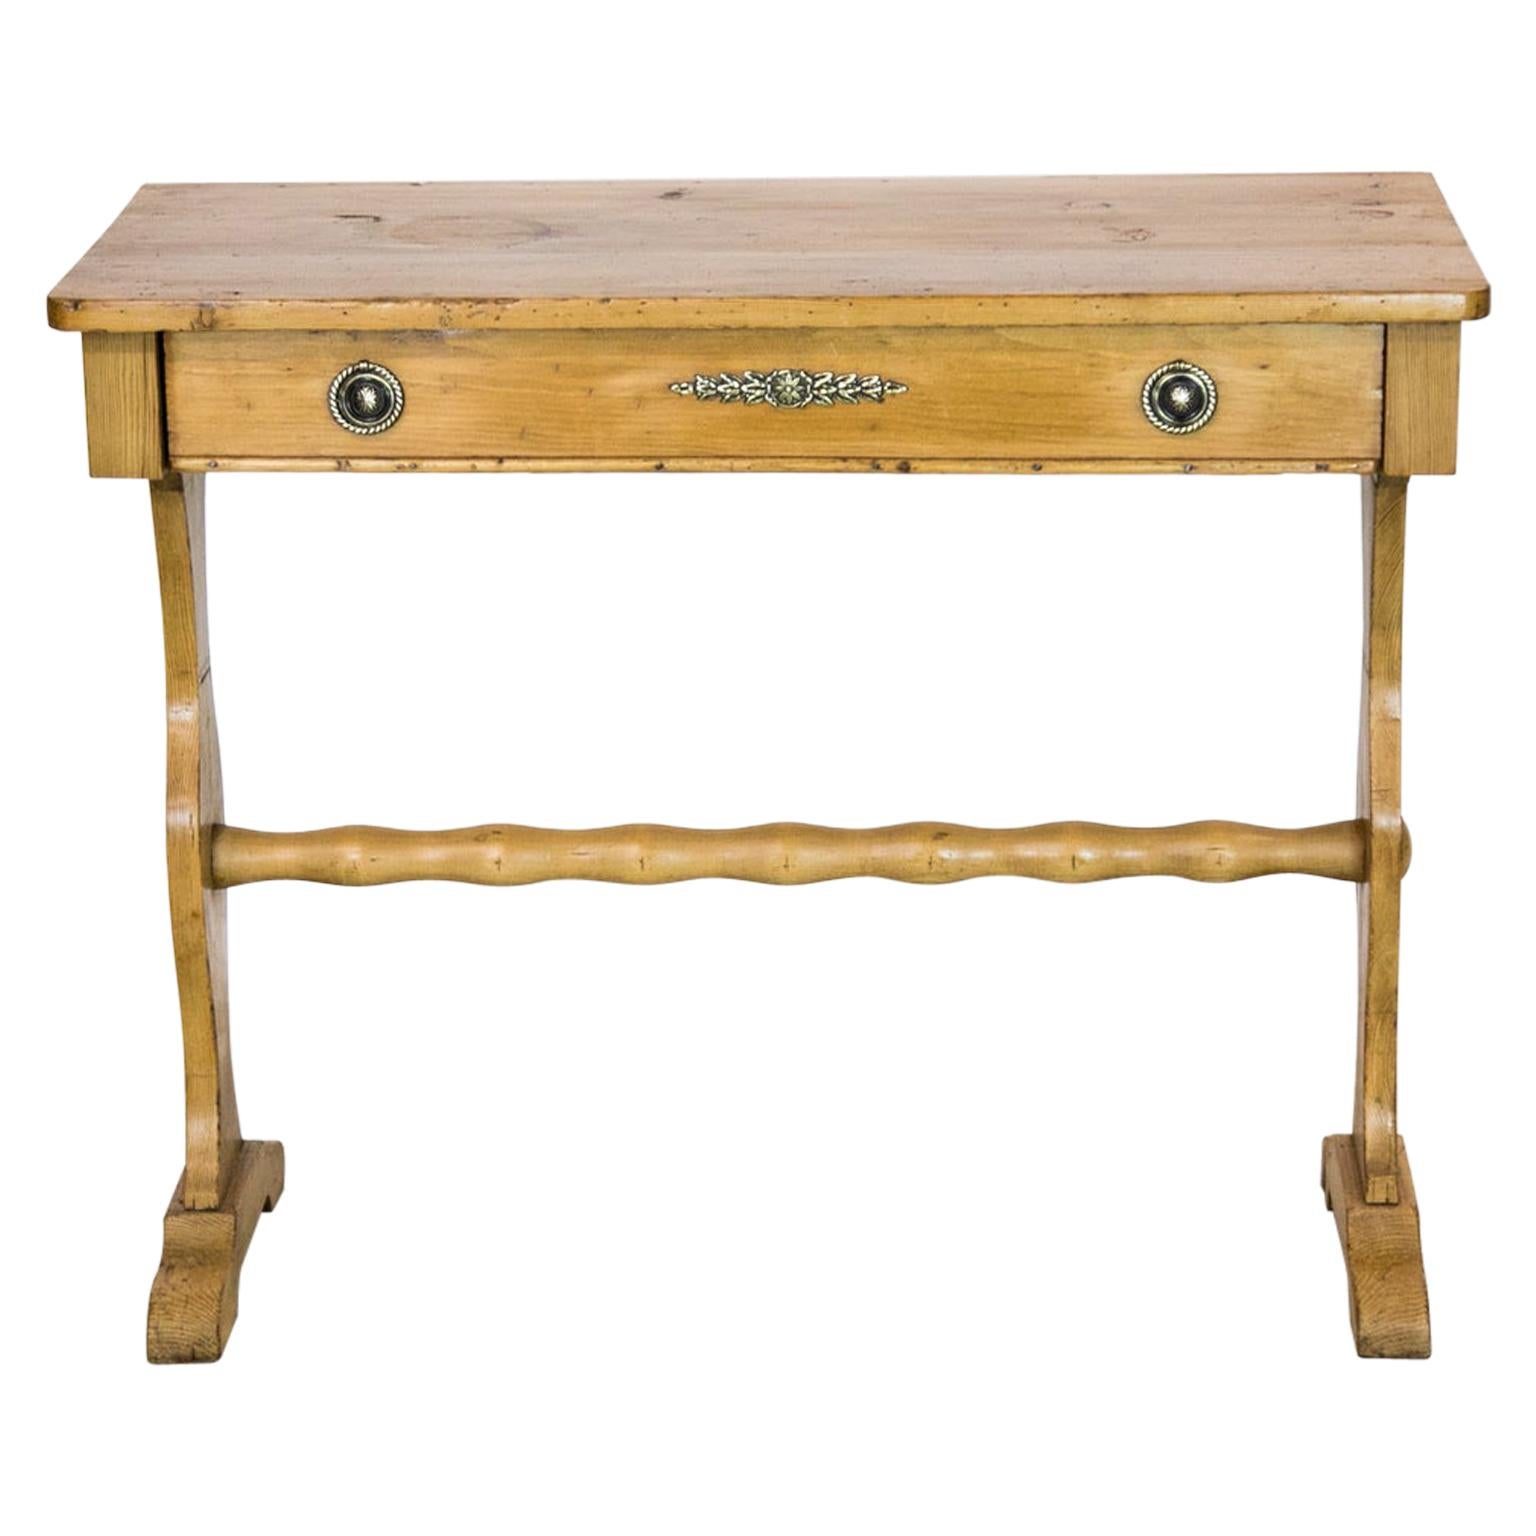 English One Drawer Stretcher Pine Table